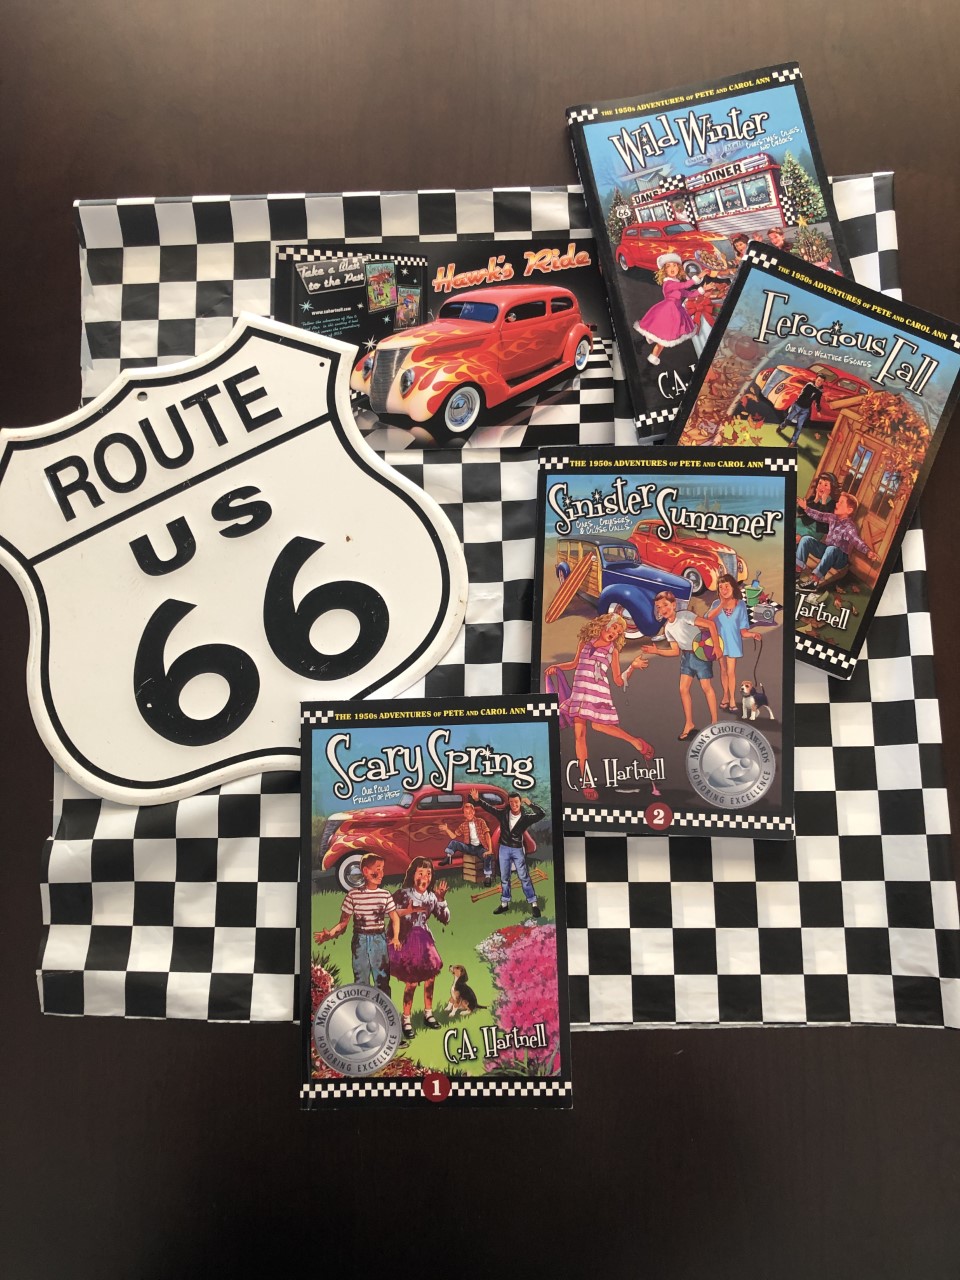 route-66-road-trip-getting-ready